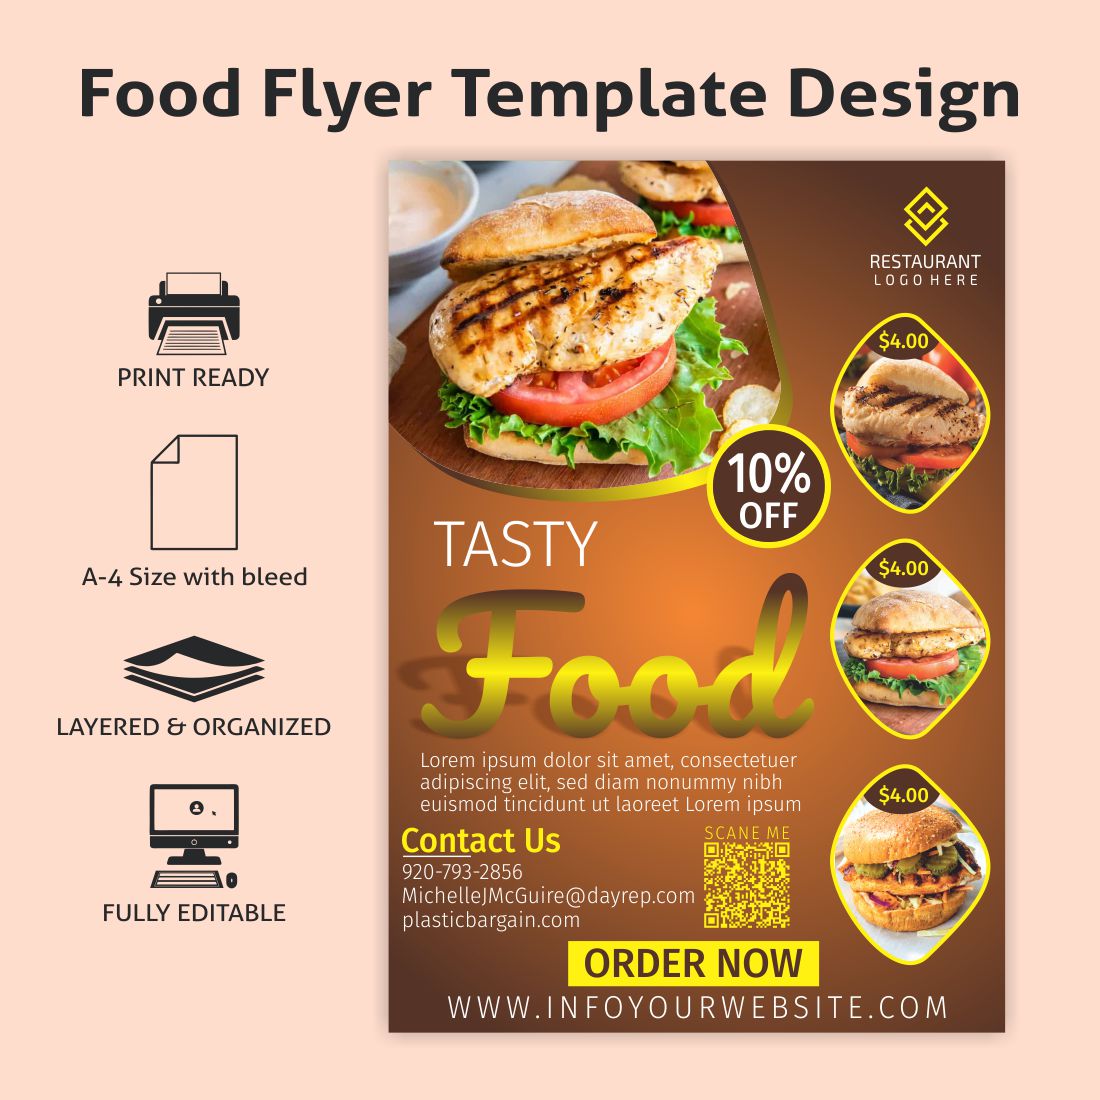 Food Flyer Template Design cover image.